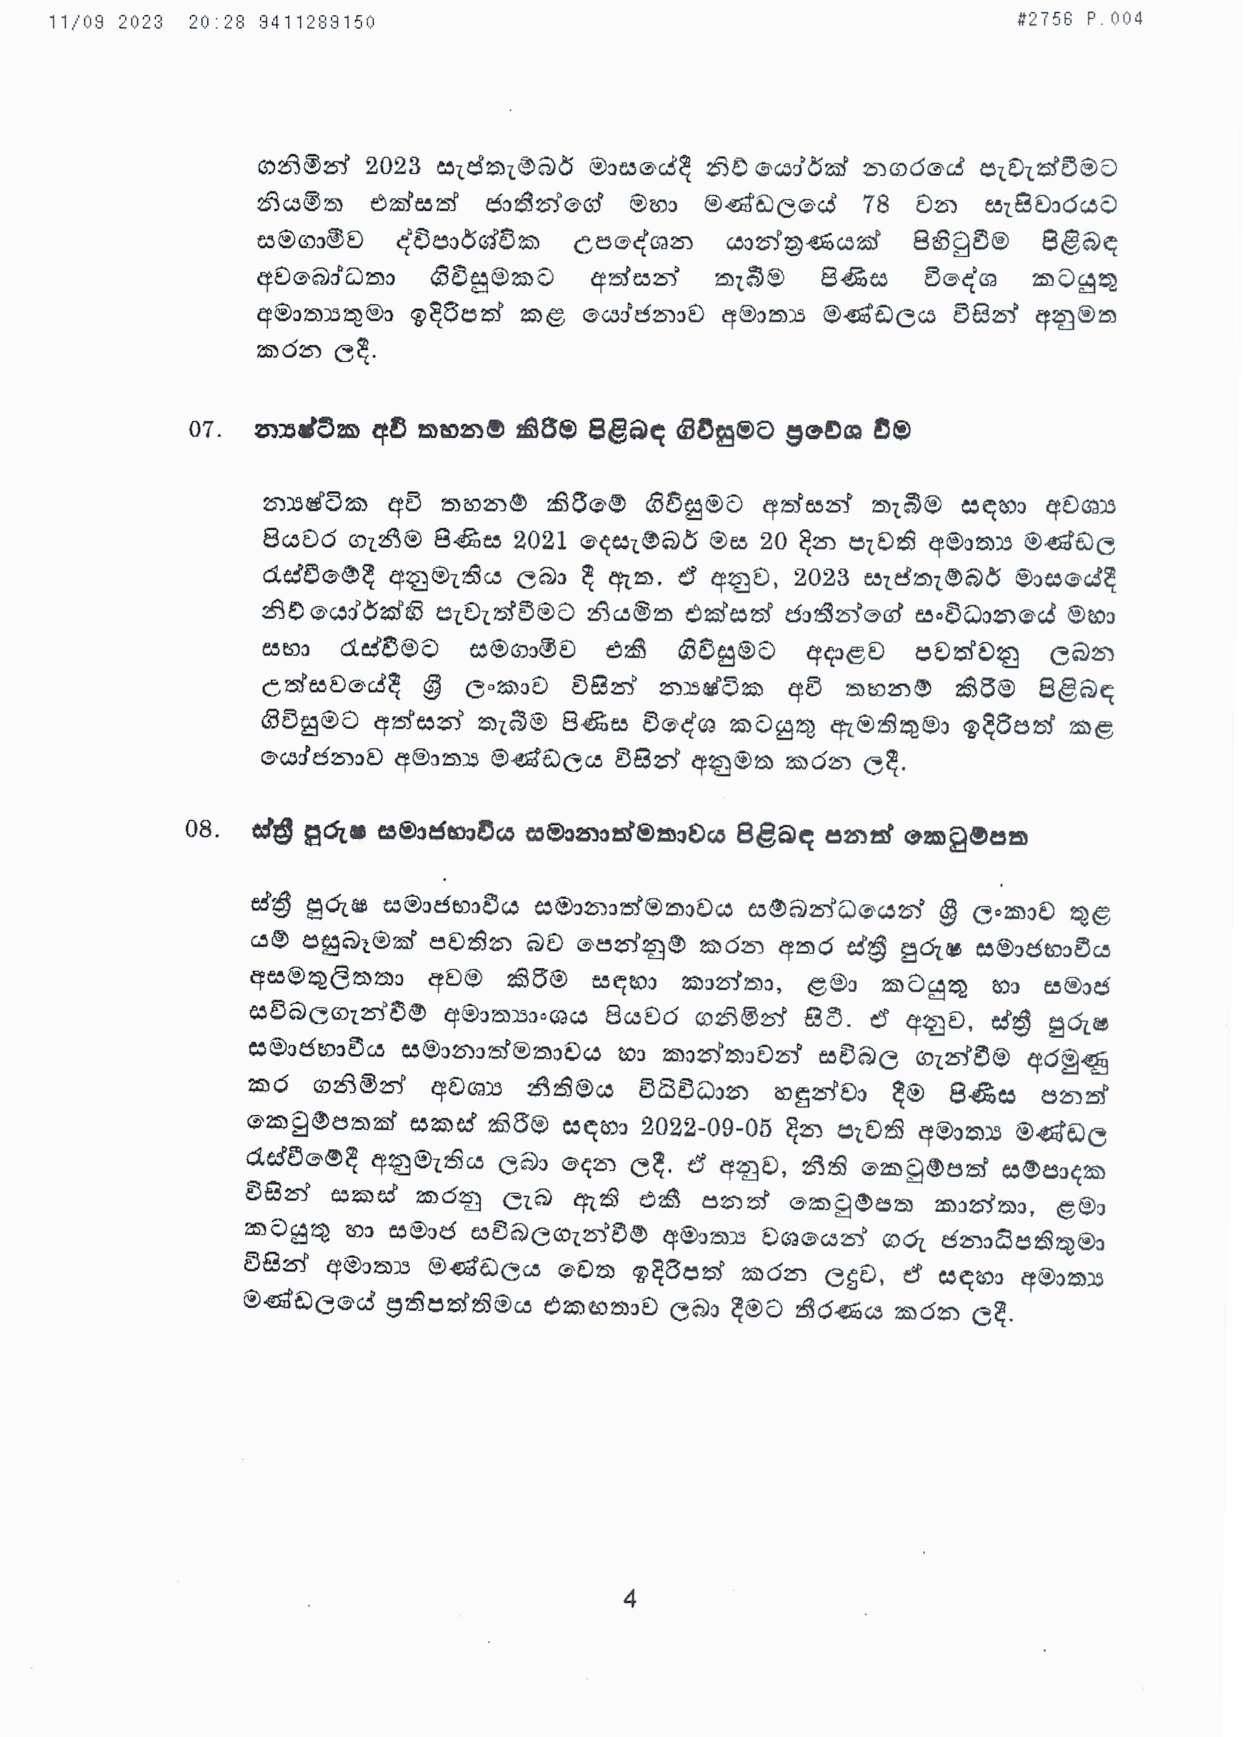 Cabinet Decision on 11.09.2023 page 004